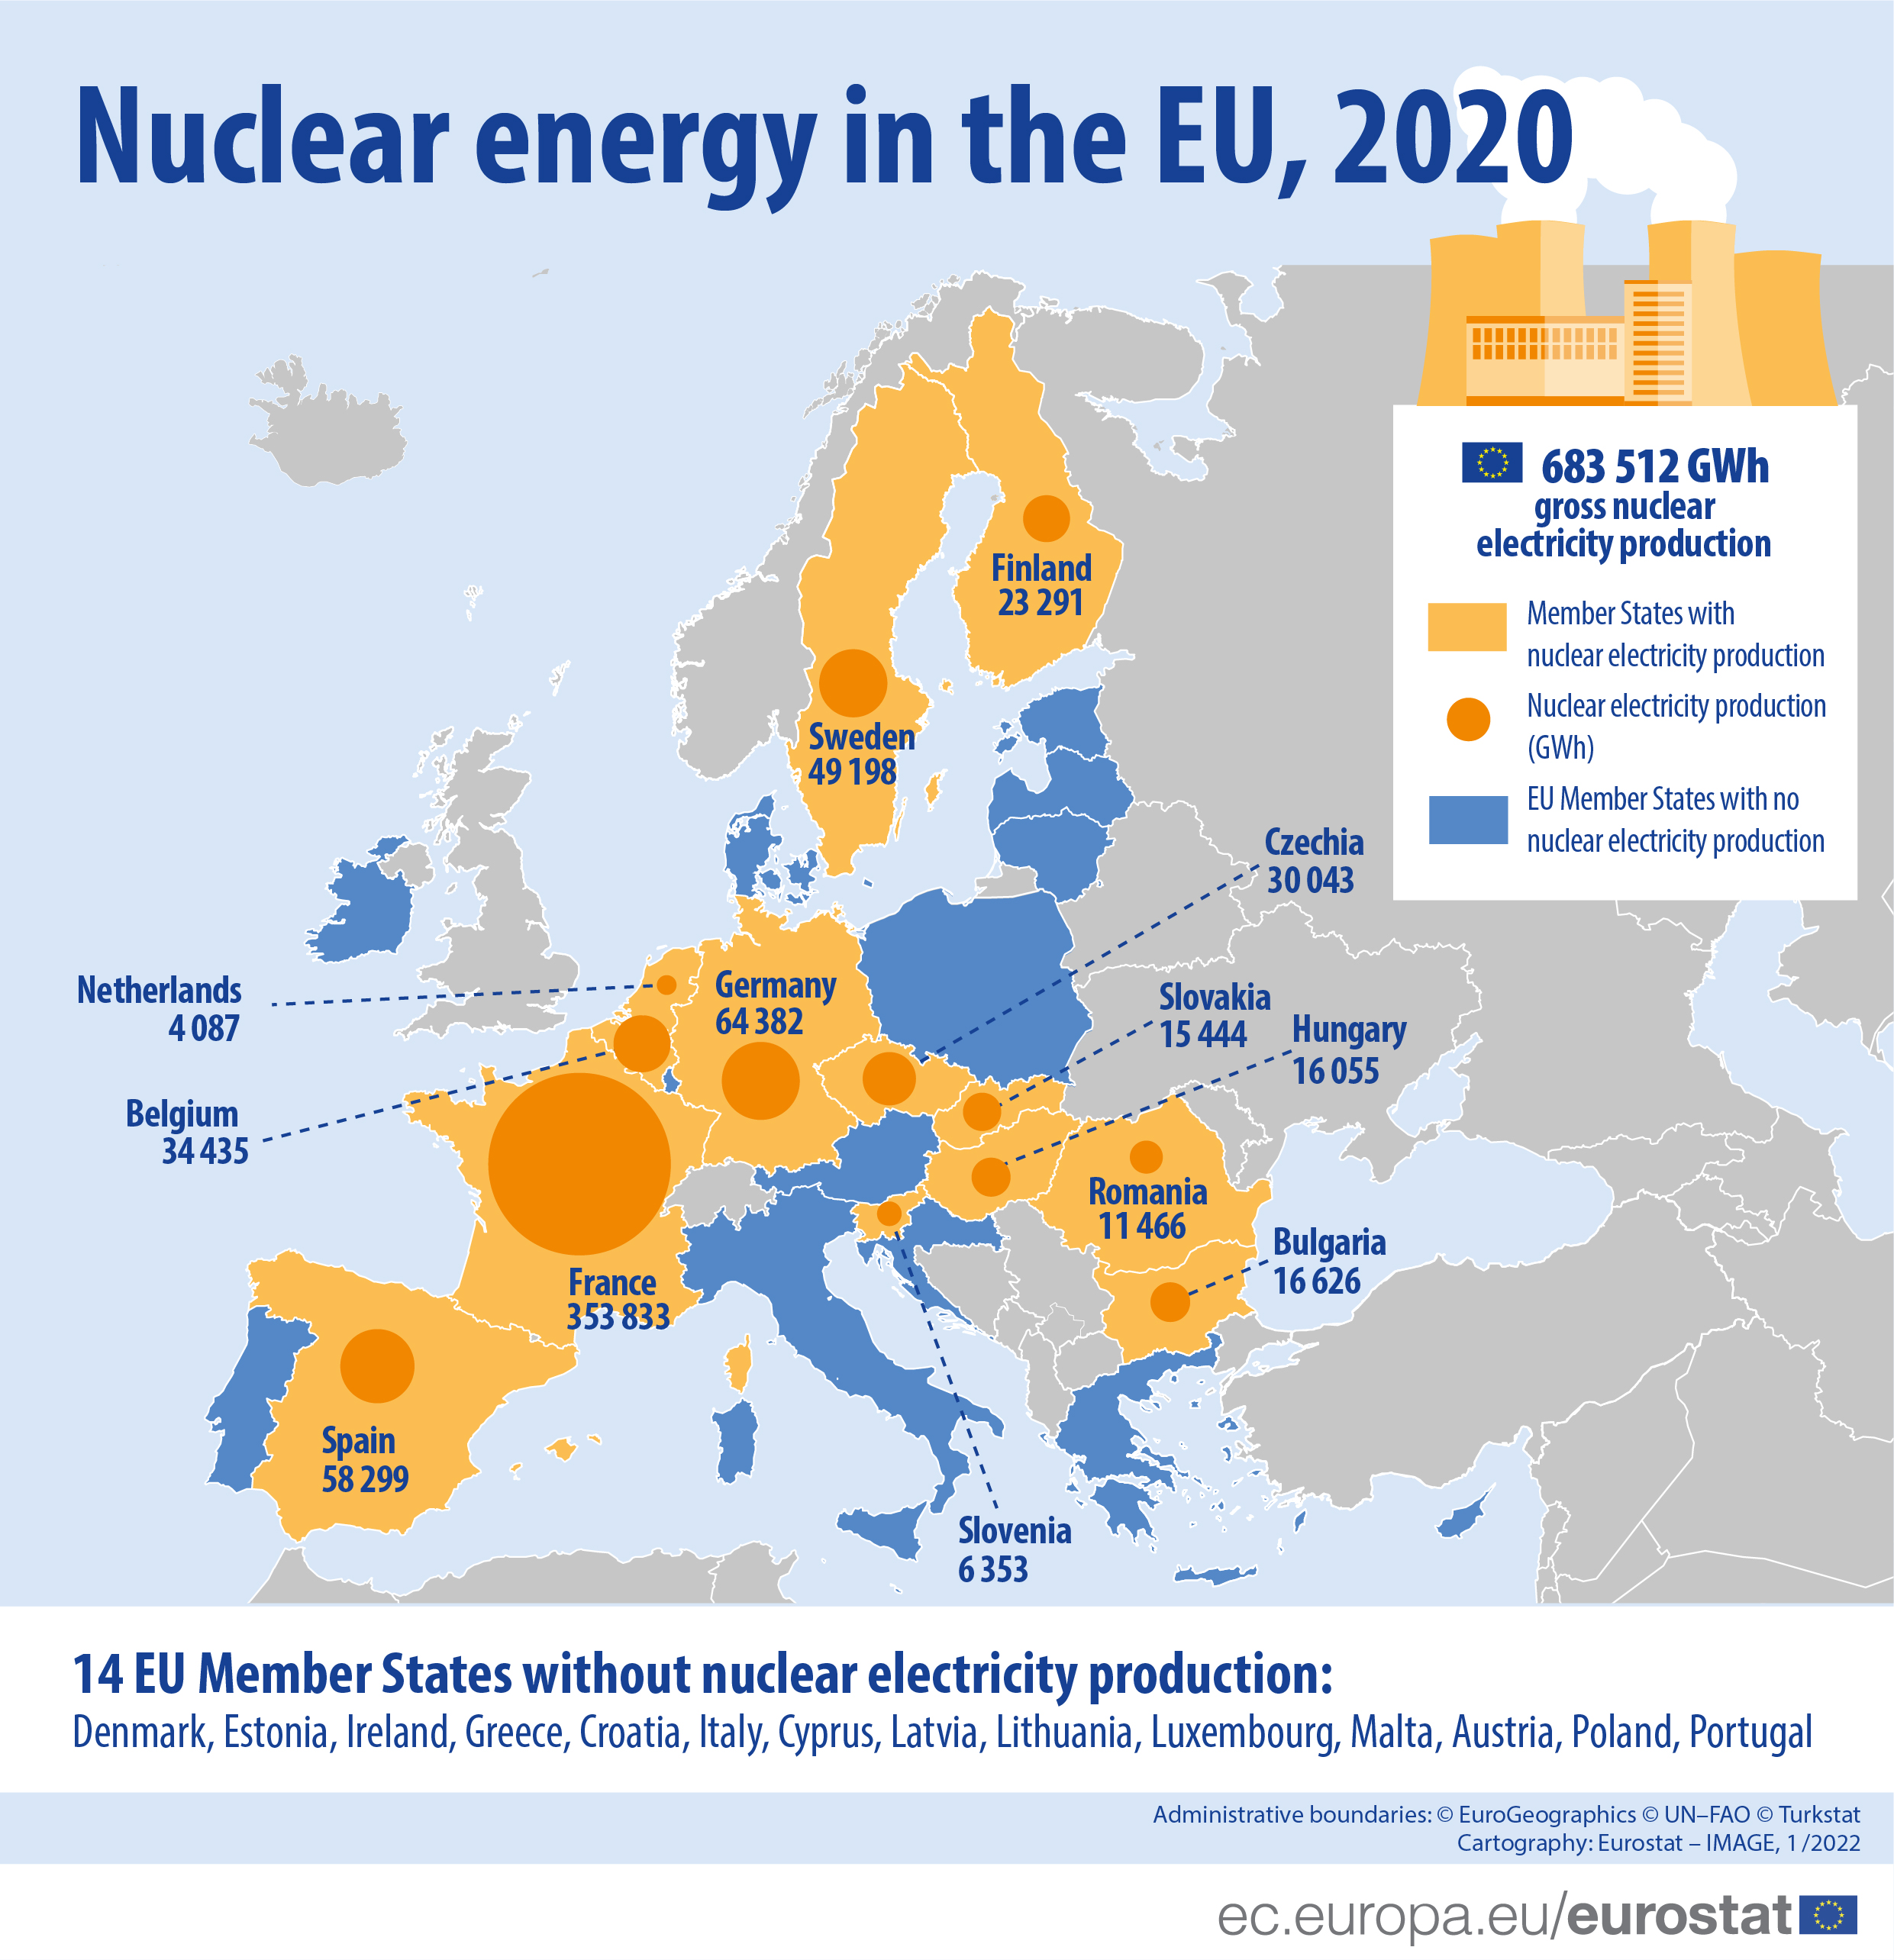  Nuclear energy production in the 13 EU Member States, 2020 data 